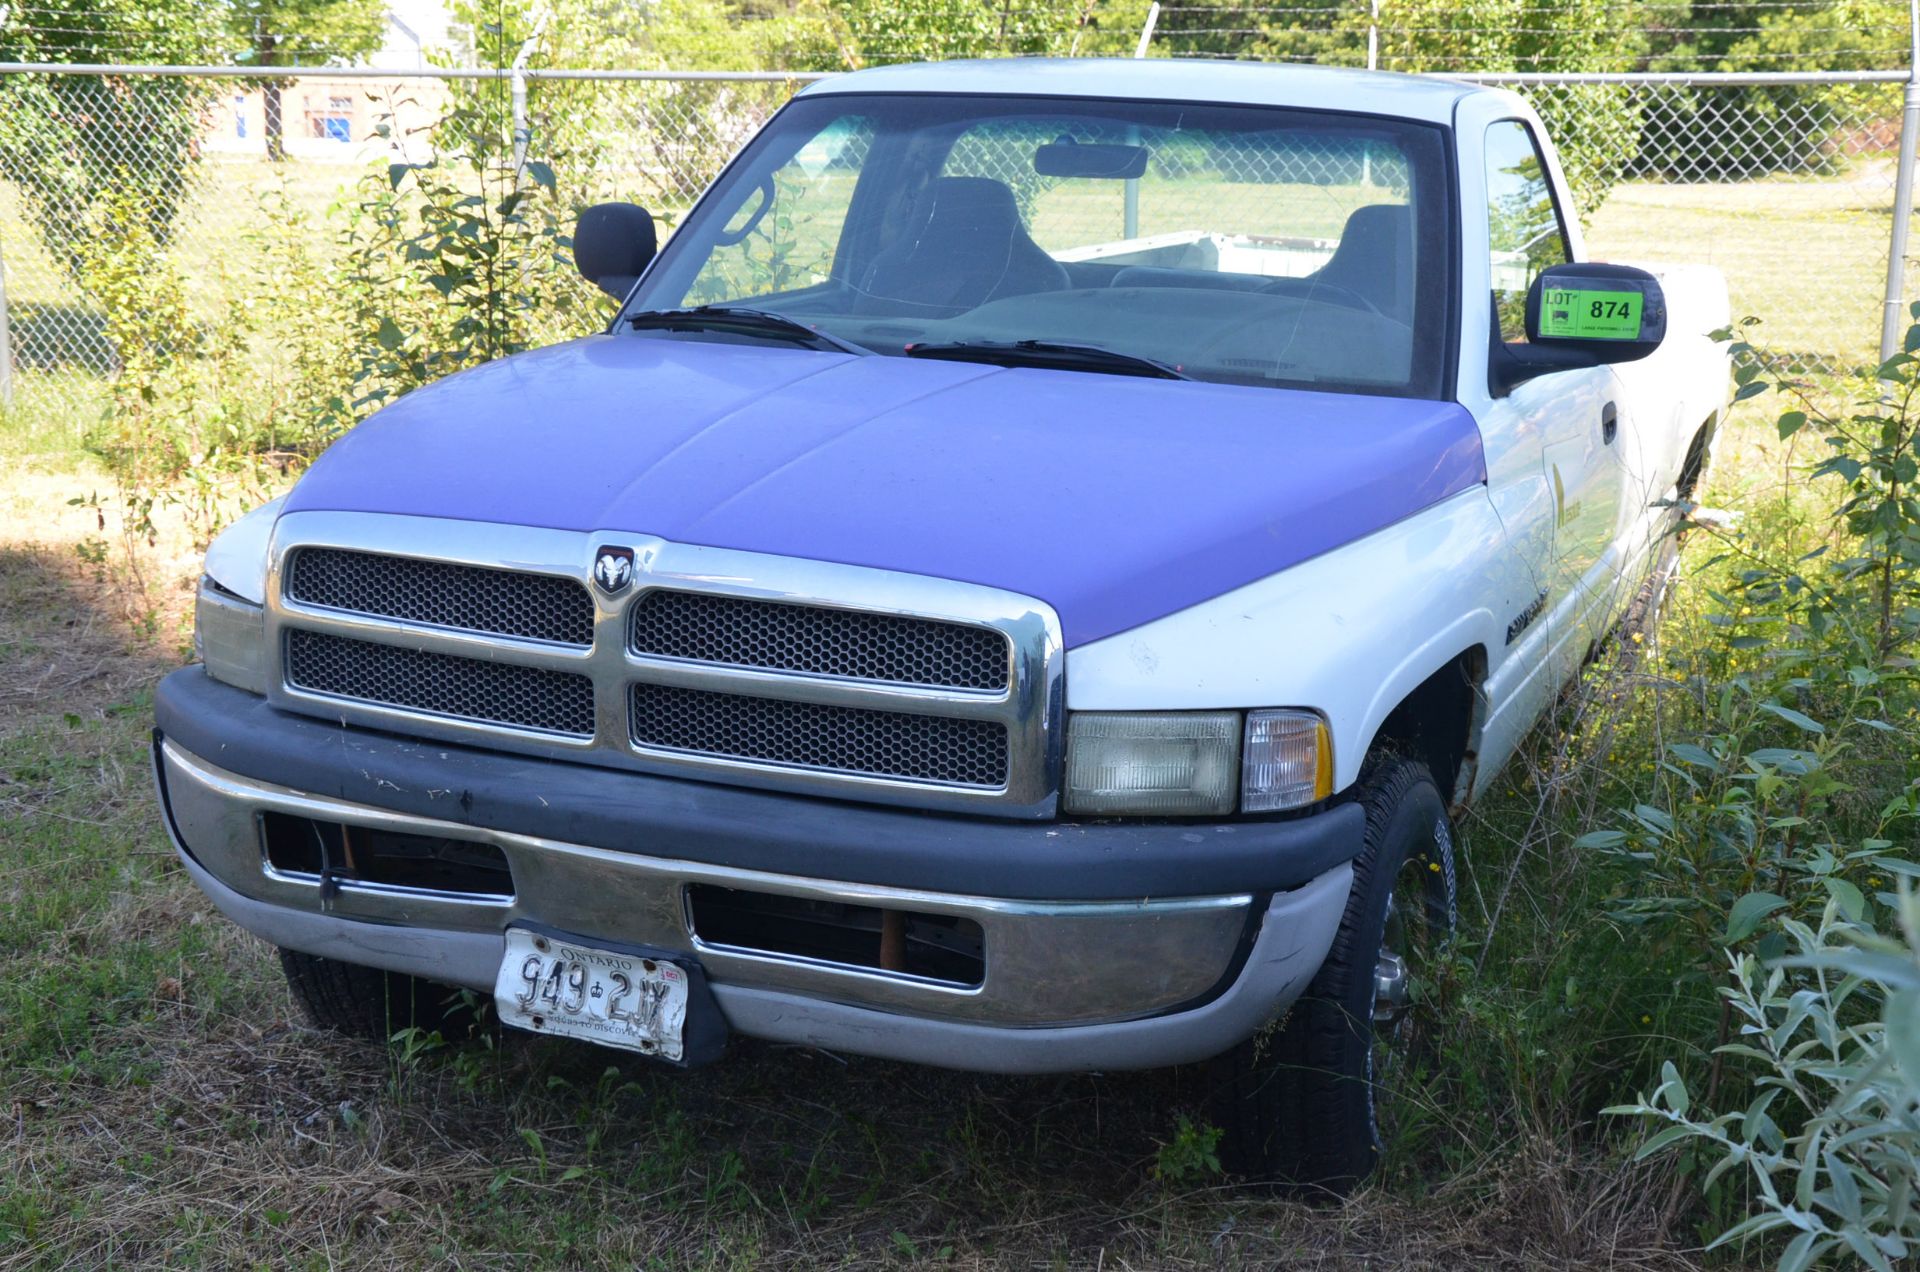 DODGE RAM 1500 REGULAR CAB PICKUP TRUCK, VIN N/A (OFF-ROAD/YARD TRUCK ONLY - NOT PLATED) [RIGGING